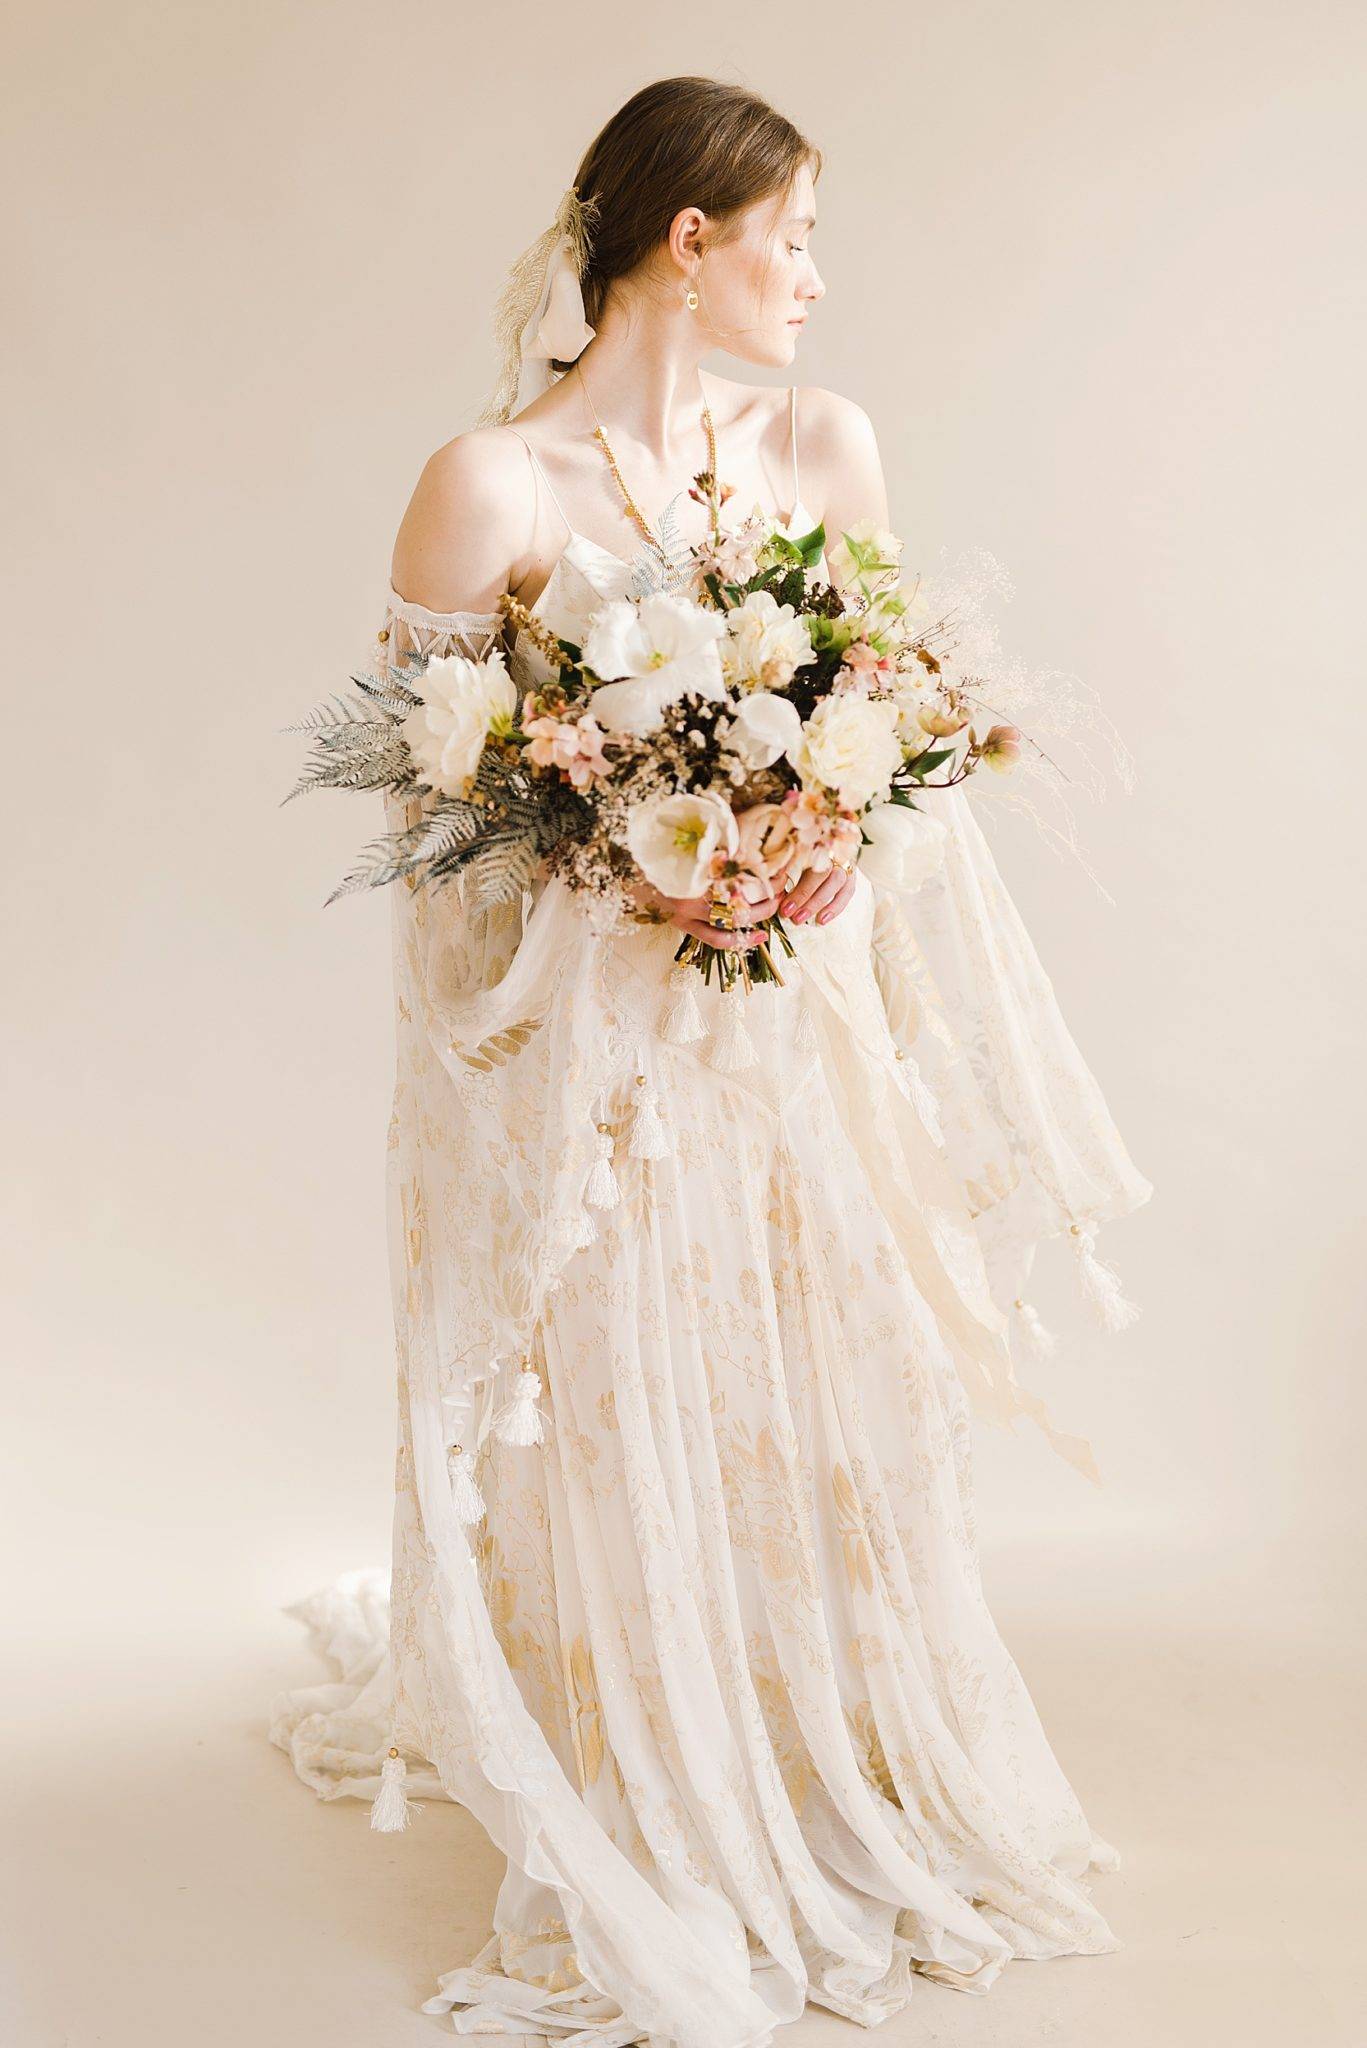 Luxury Wedding Editorial Session: Bride Looking to the Side